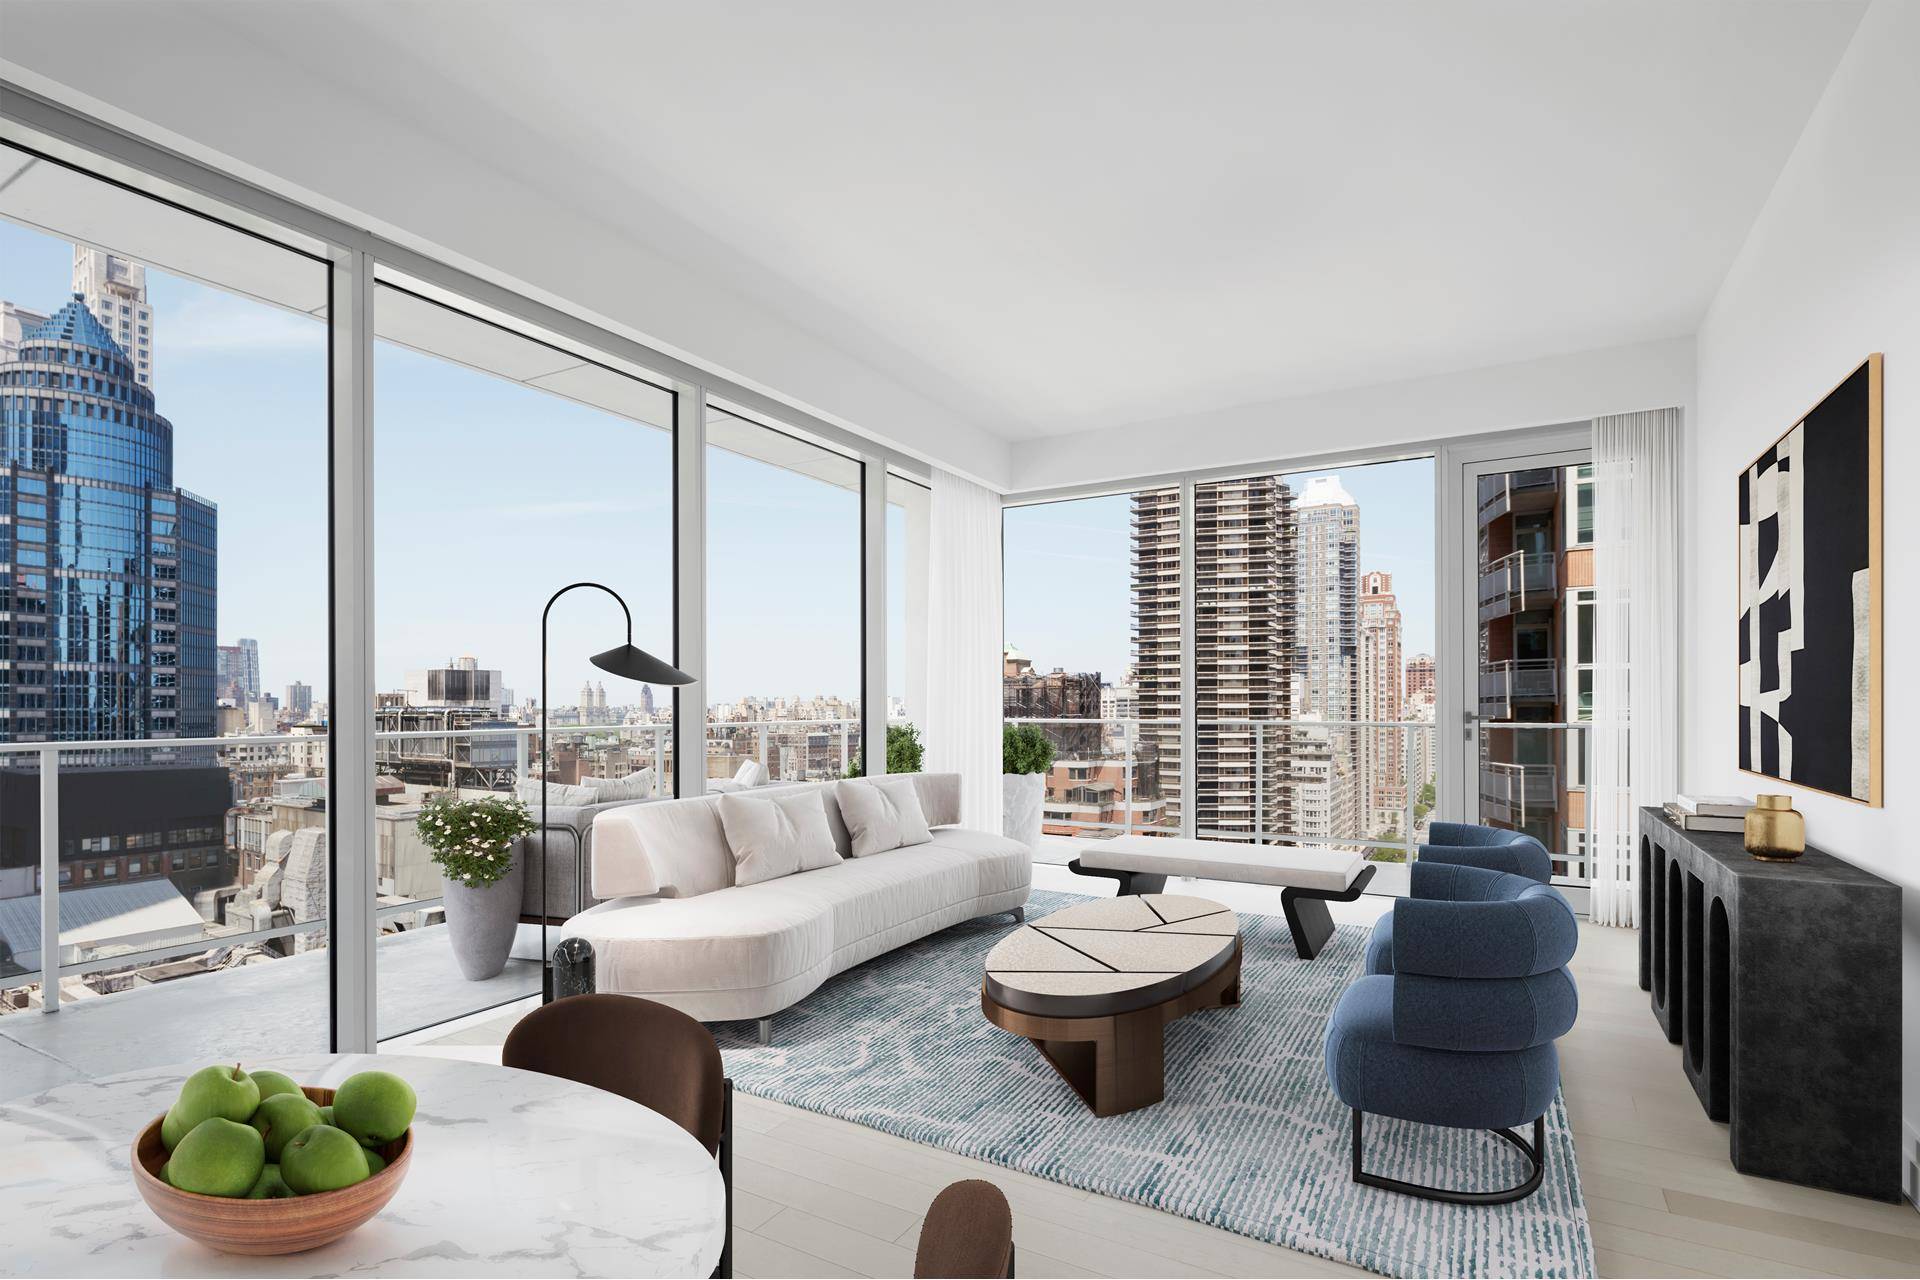 This spacious 1, 416 square foot two bedroom, two and a half bath corner residence features over 91 linear feet of wrap around terrace with northern exposures overlooking Central Park, ...